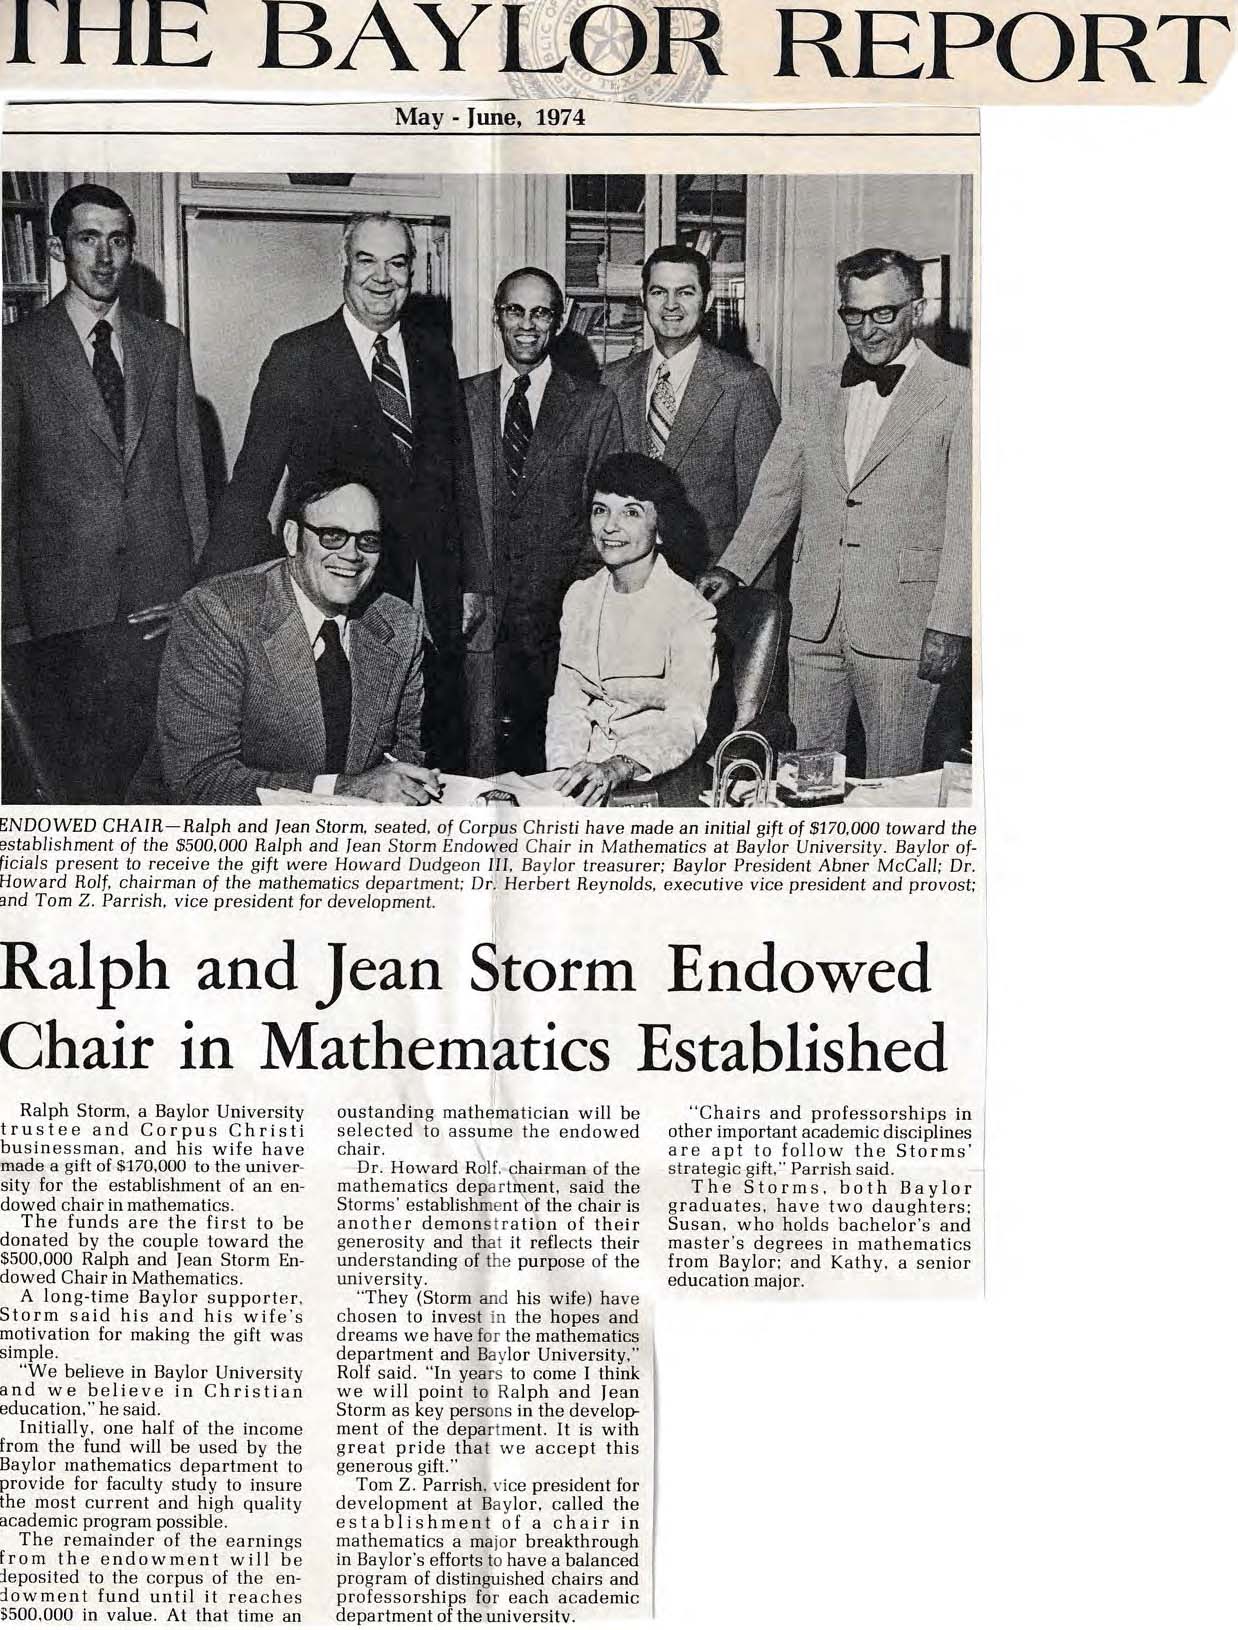 Newspaper clipping with headline 'Ralph and Jean Storm Endowed Chair in Mathematics Established'